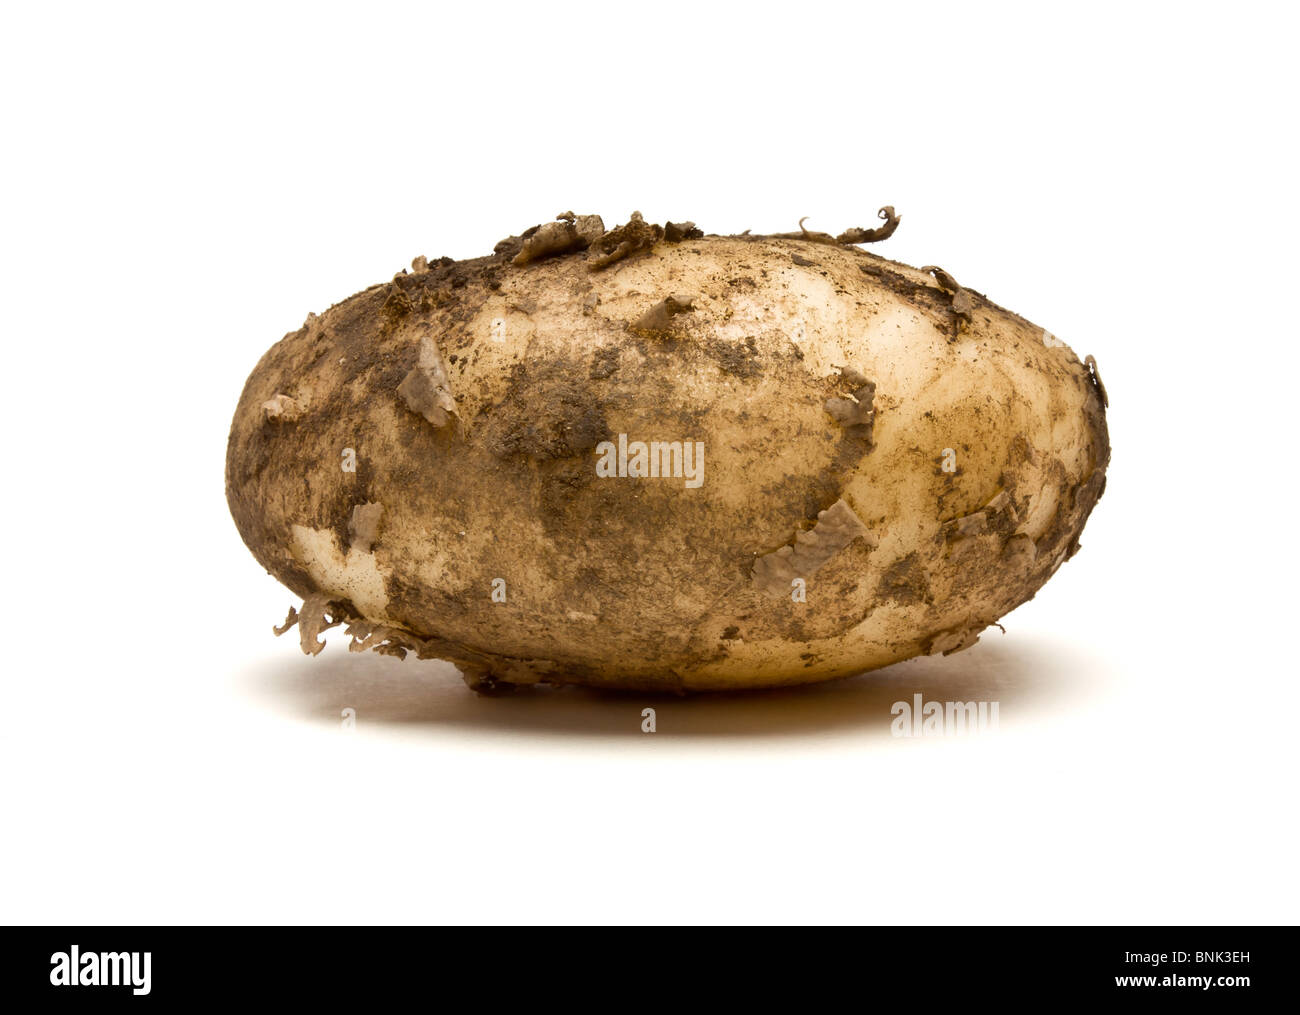 Lincoln new Potatoes from low perspective isolated against white background. Stock Photo